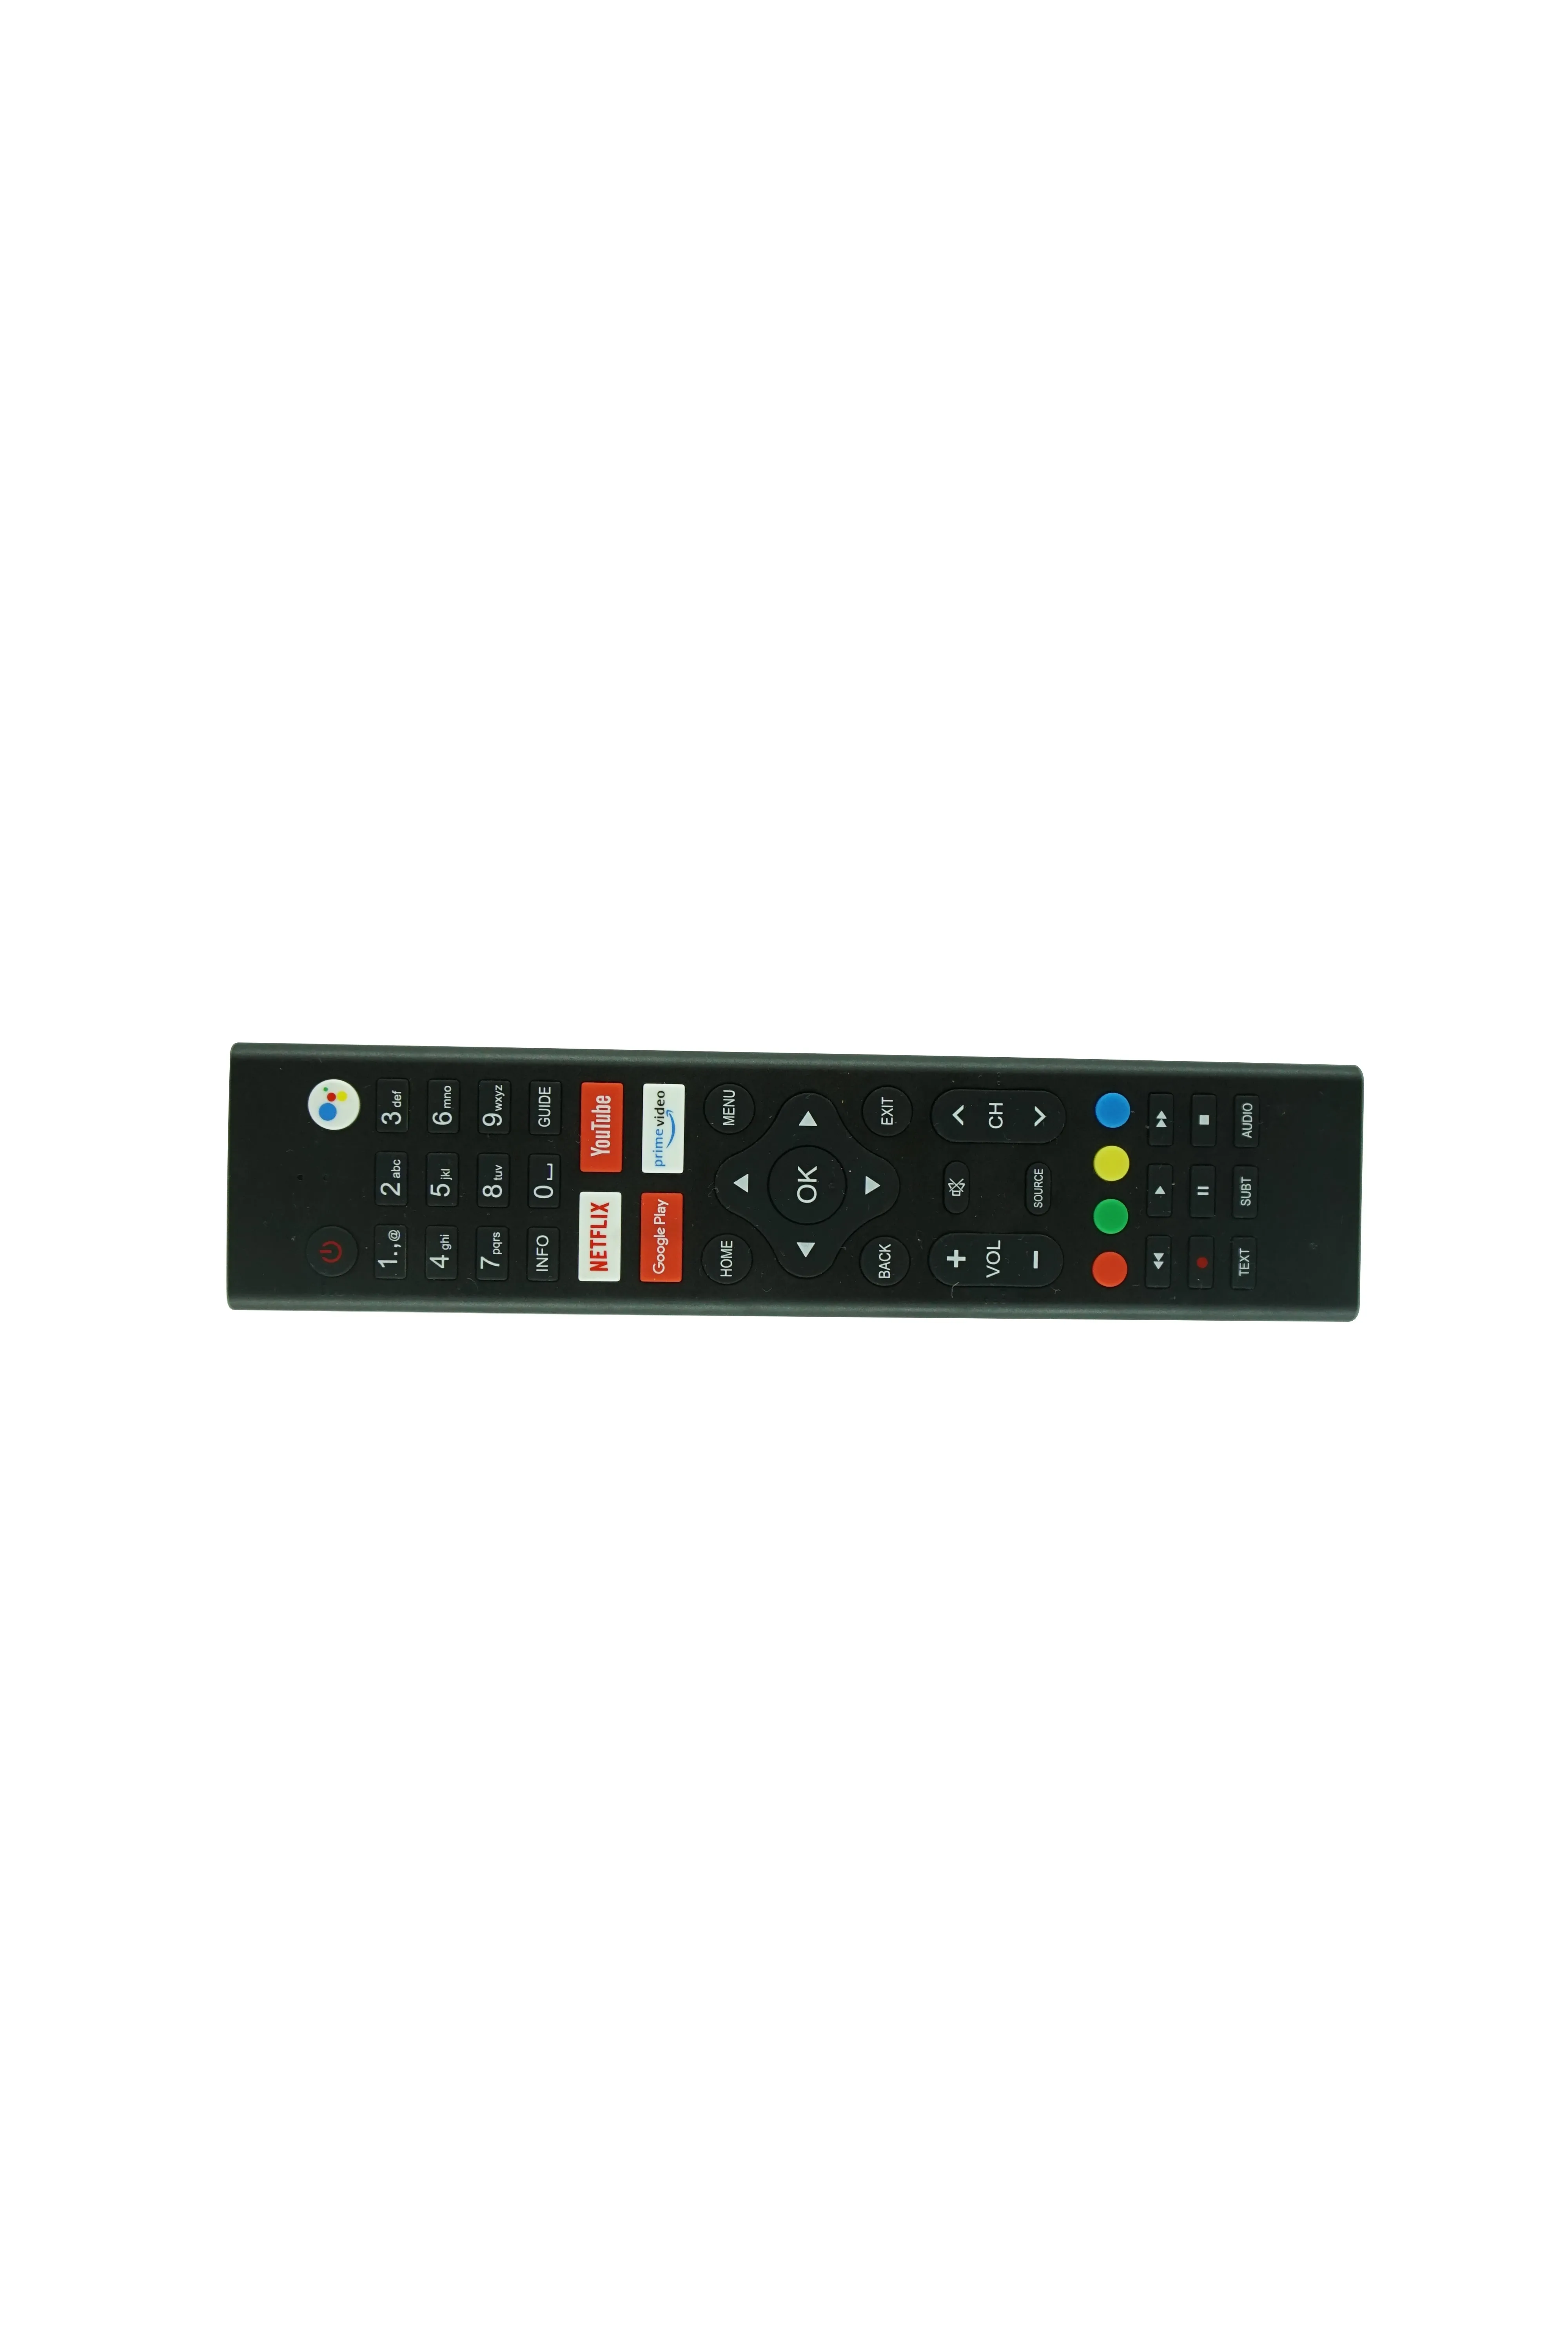 Voice Bluetooth Remote Control For Engel MD0523 LE4090ATV LE3290ATV LE2490AV LE4290ATV LE5090ATV Smart LED LCD HDTV Android TV